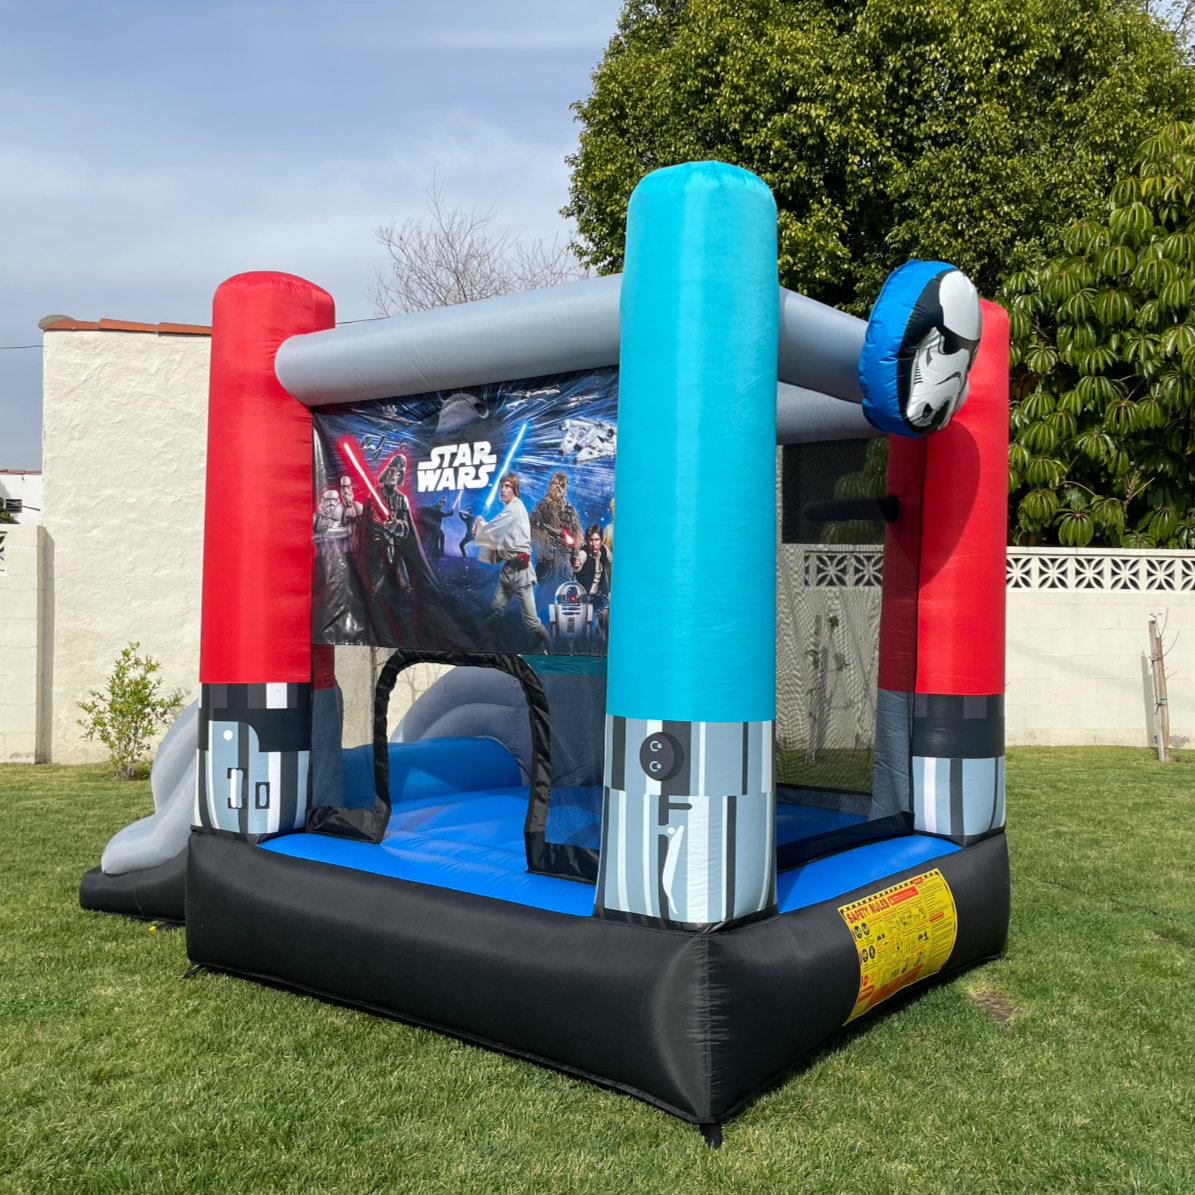 Star Wars bounce and slide - Funormous